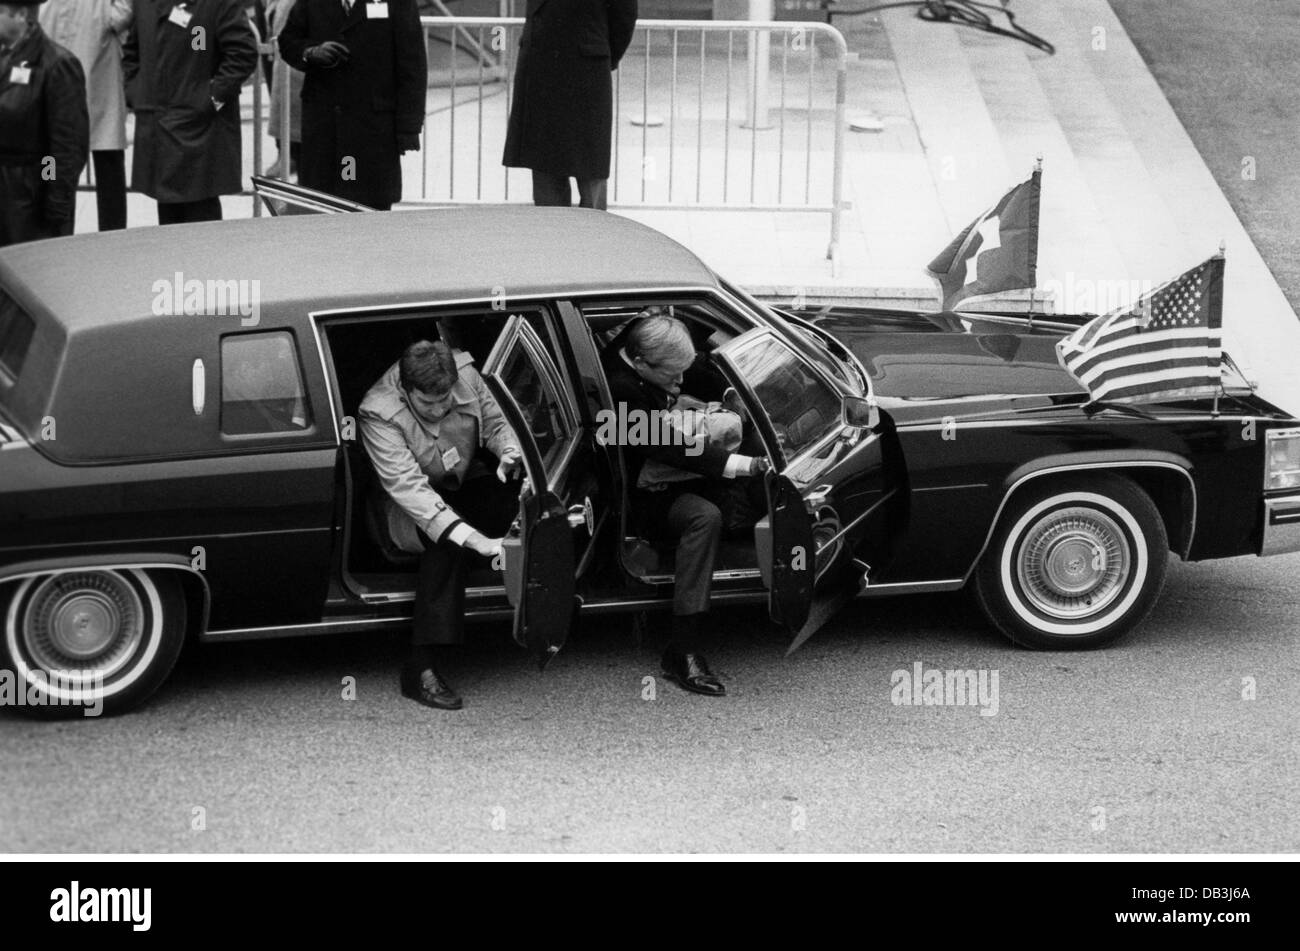 politics, conferences, summit USA - USSR, Geneva, Switzerland, 19./20.11.1985, arrival of American Secret Service Agents, 20.11.1985, conference, car, limousine, security, cold war, 1980s, 80s, 20th century, historic, historical, people, Additional-Rights-Clearences-Not Available Stock Photo